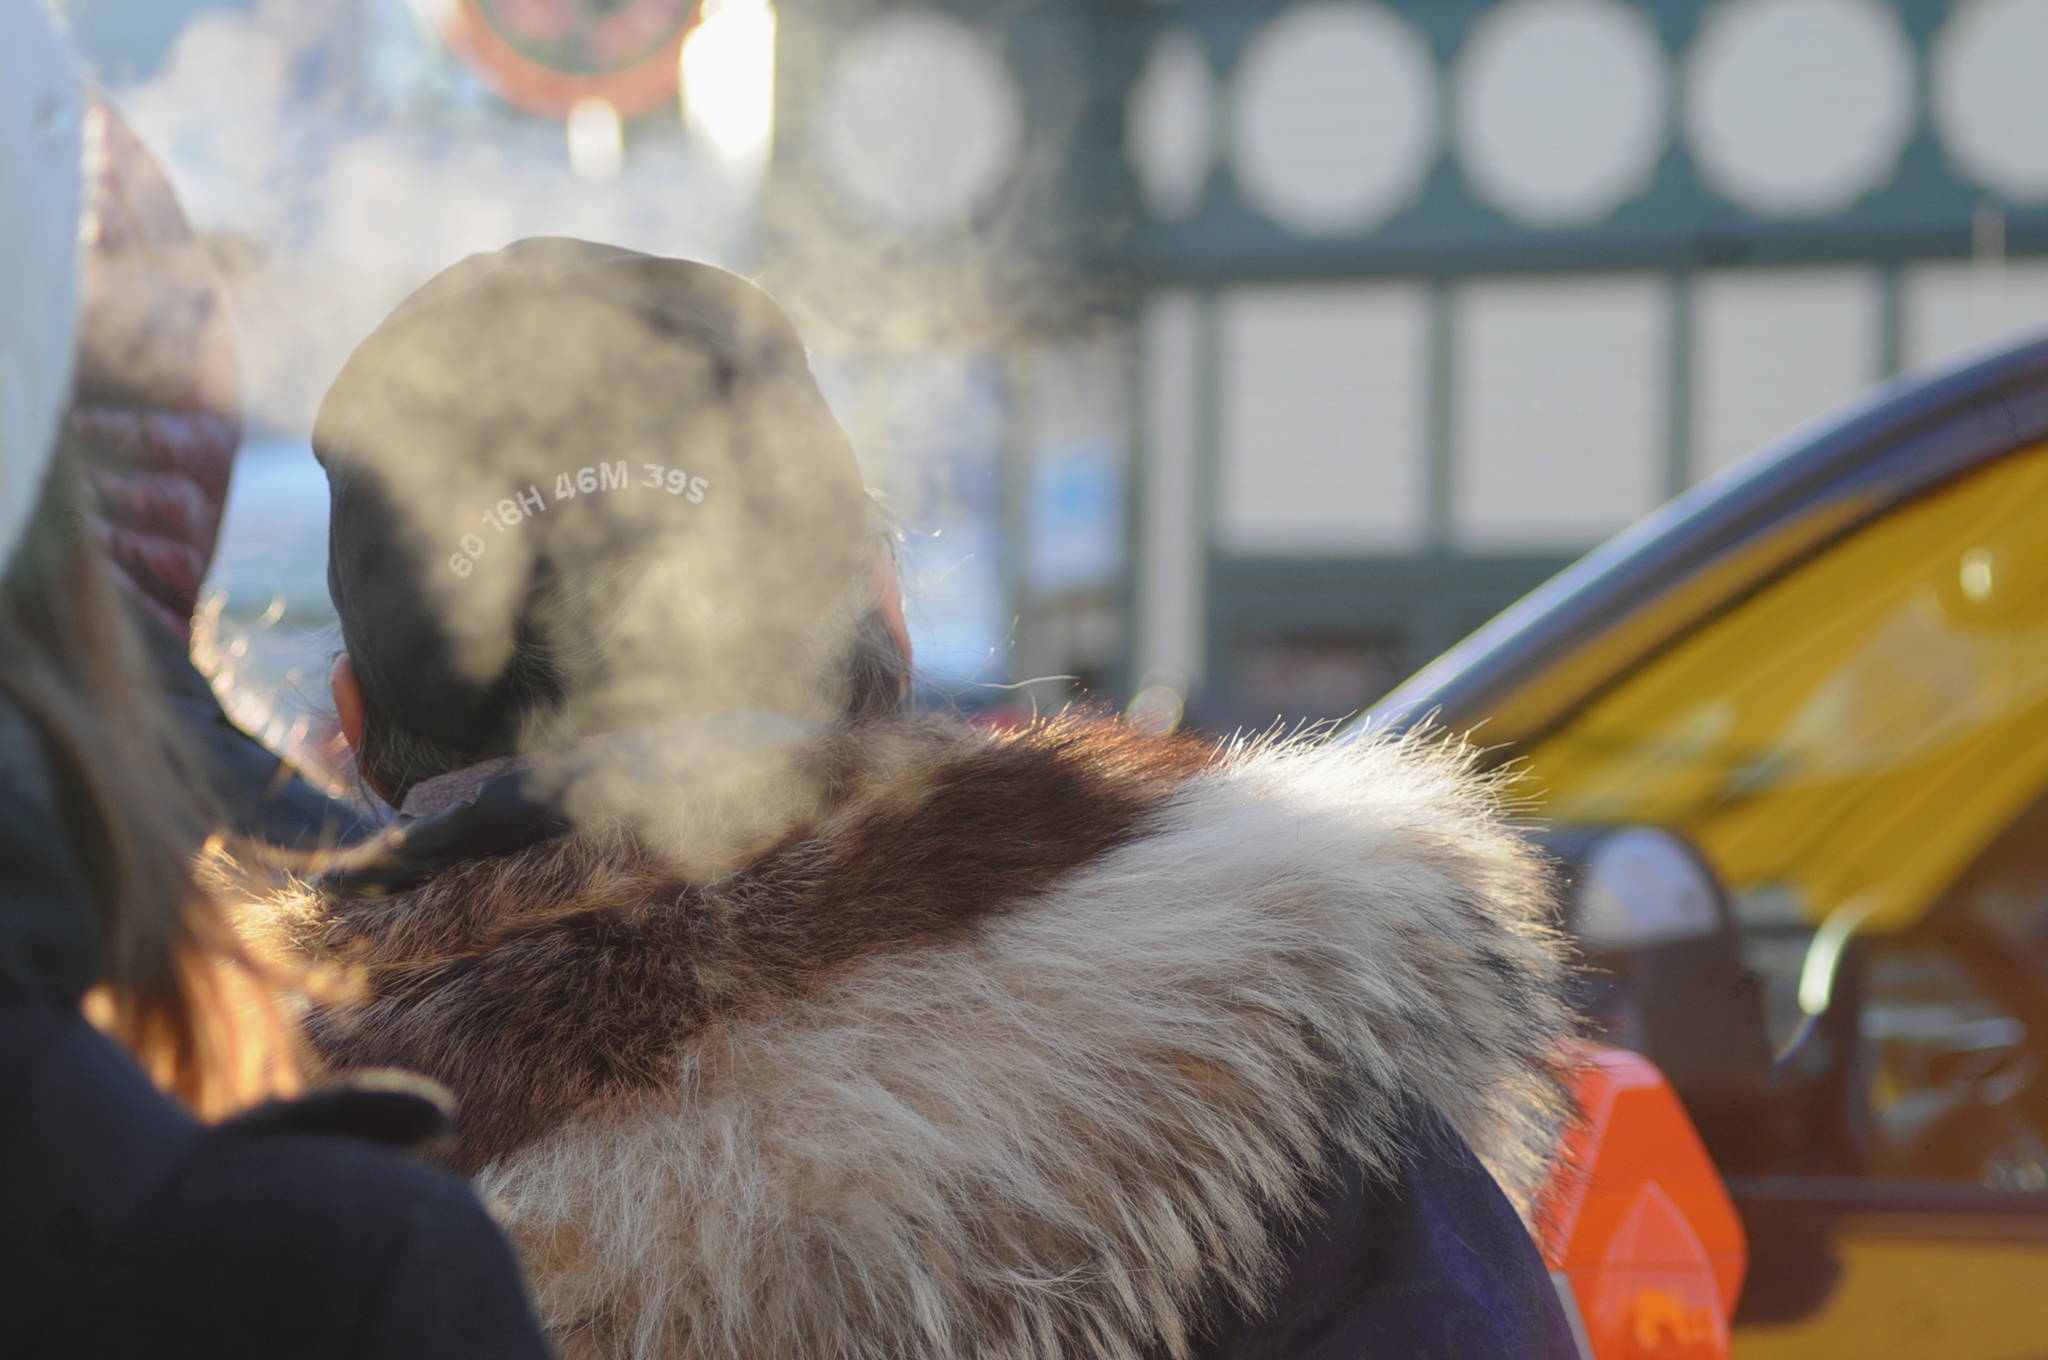 A spectator cranes over the crowd near the starting line at the ceremonial start of the 45th Iditarod sled dog race Saturday, March 4, 2017 in Anchorage, Alaska. The Iditarod is the culmination of a week-long festival called the Fur Rondy, a celebration of the end of the trapping season when, historically, trappers would come to Anchorage to auction off their furs. Many people in the crowd wore different types of fur, from lined kuspuks to fox-fur hats. (Elizabeth Earl/Peninsula Clarion)